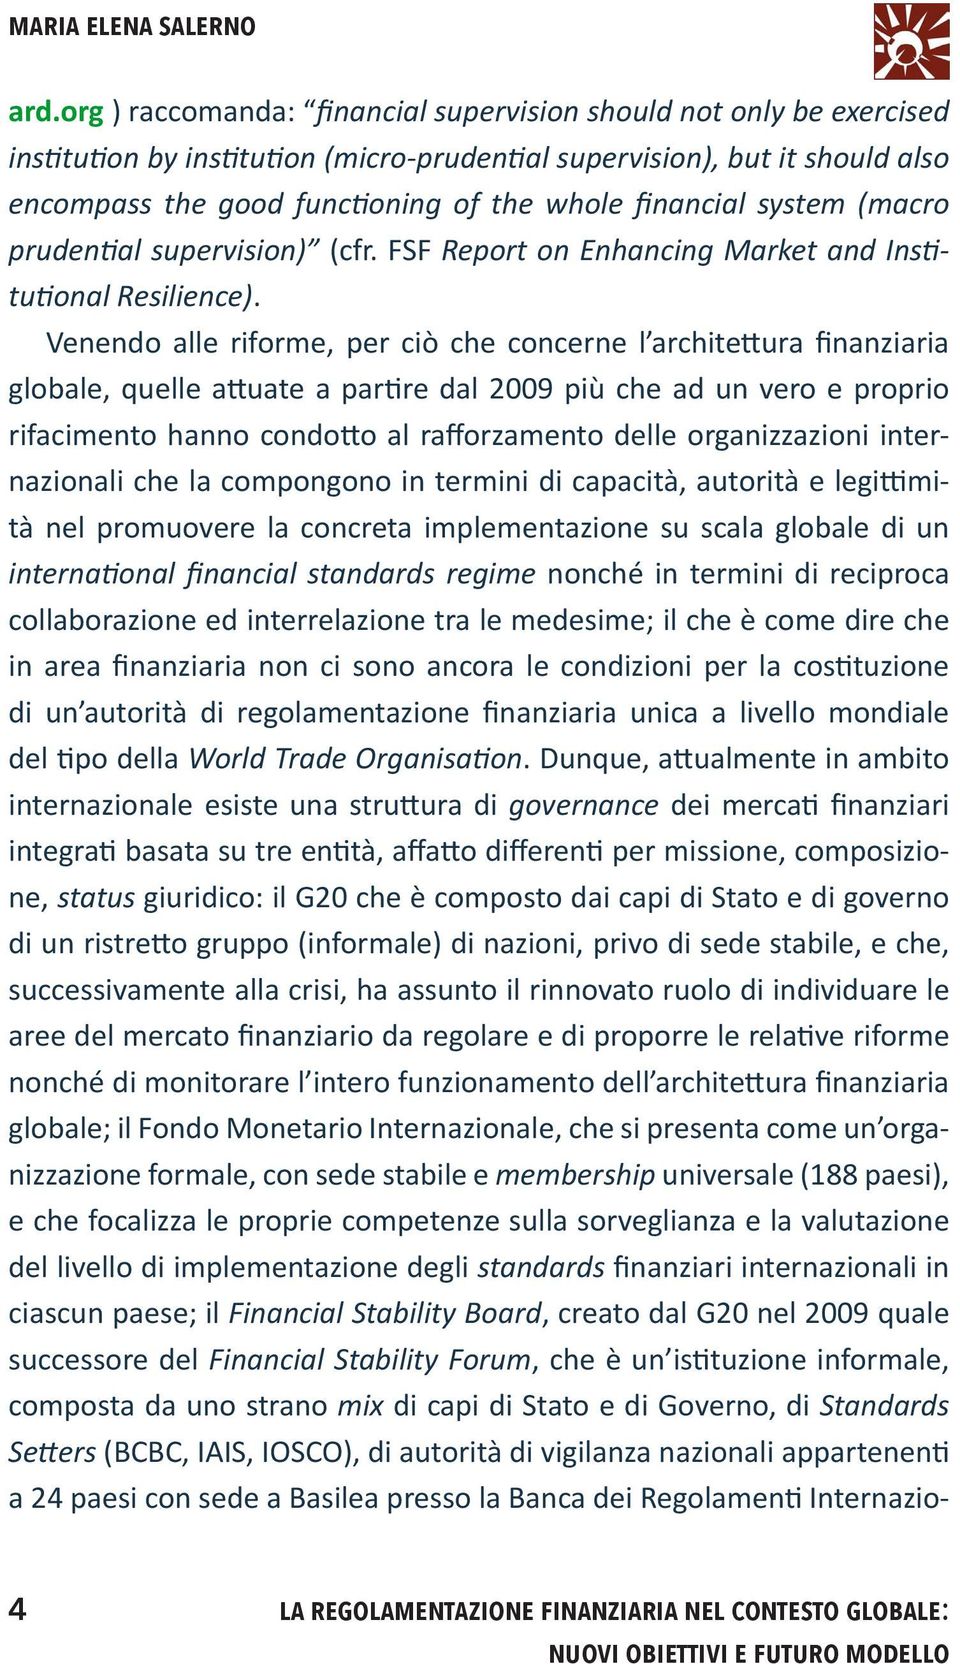 financial system (macro prudential supervision) (cfr. FSF Report on Enhancing Market and Institutional Resilience).